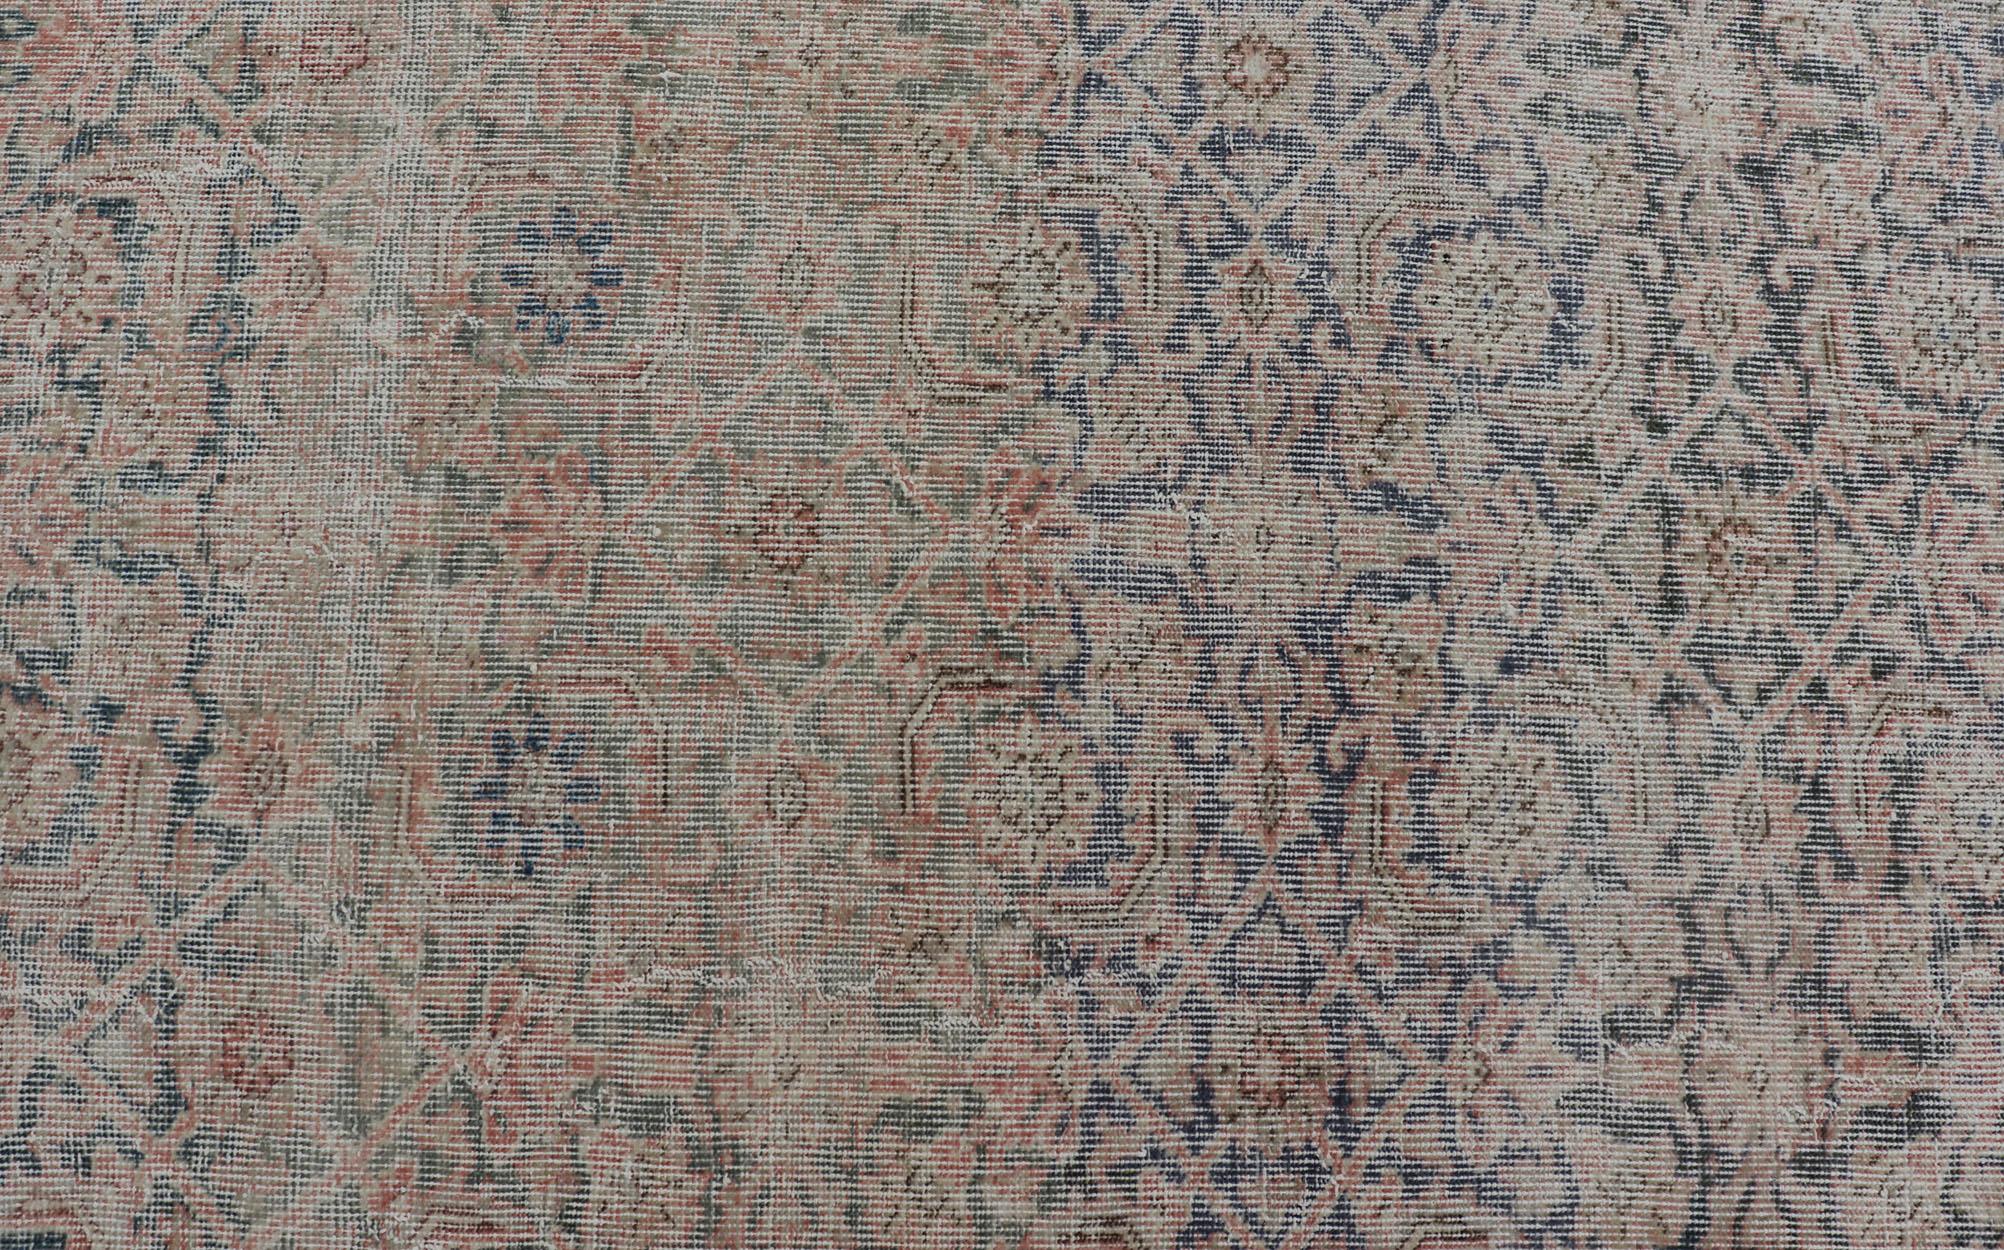 Antique Persian Malayer Rug in Variegated Gray-Blue, Cream and Soft Pink In Fair Condition For Sale In Atlanta, GA